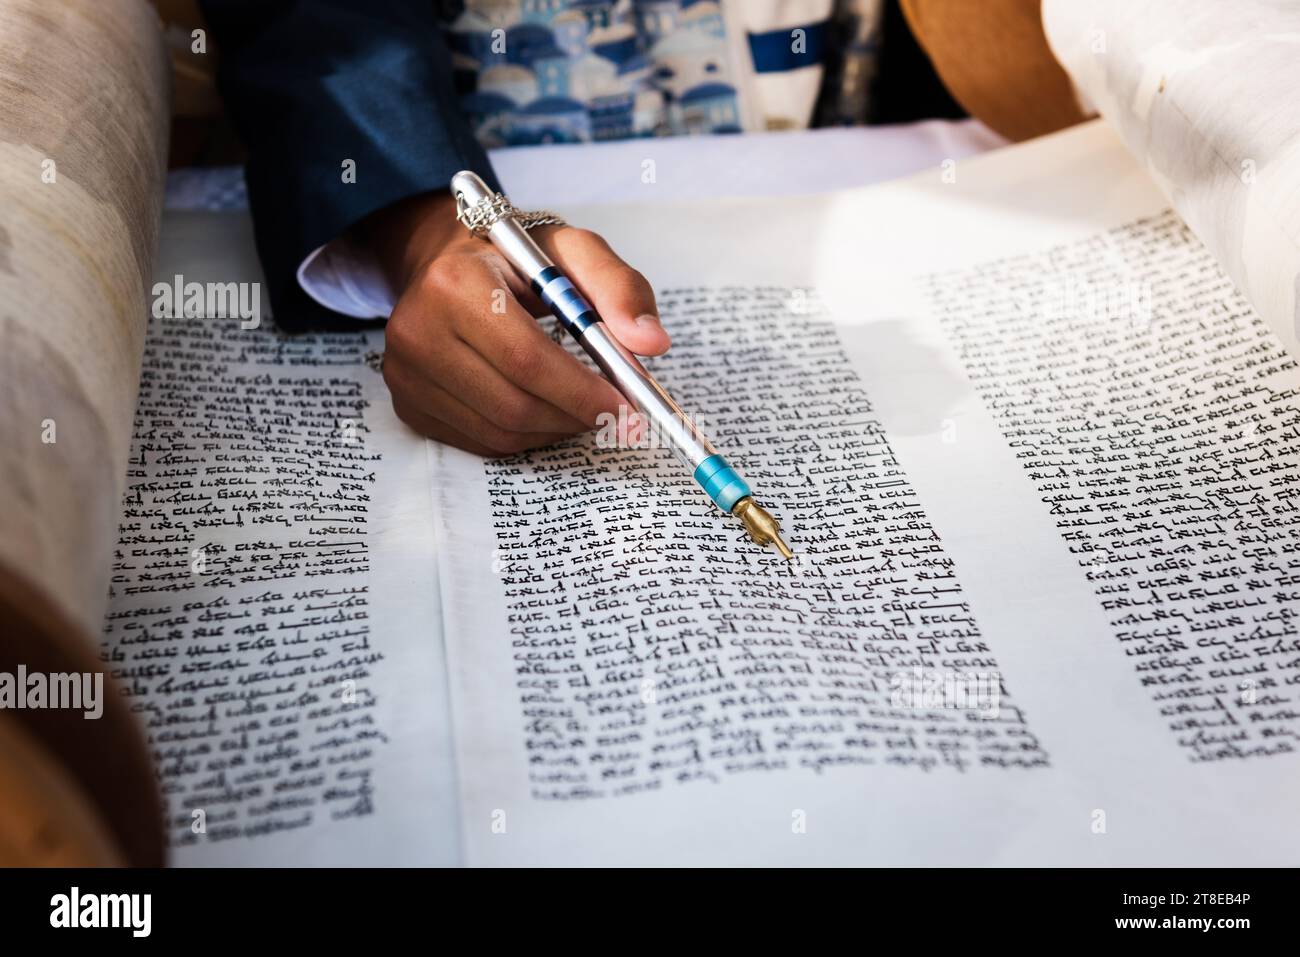 Closeup of a hand holding a yad or pointer to guide the reader through the Hebrew text of the Jewish Torah. Stock Photo